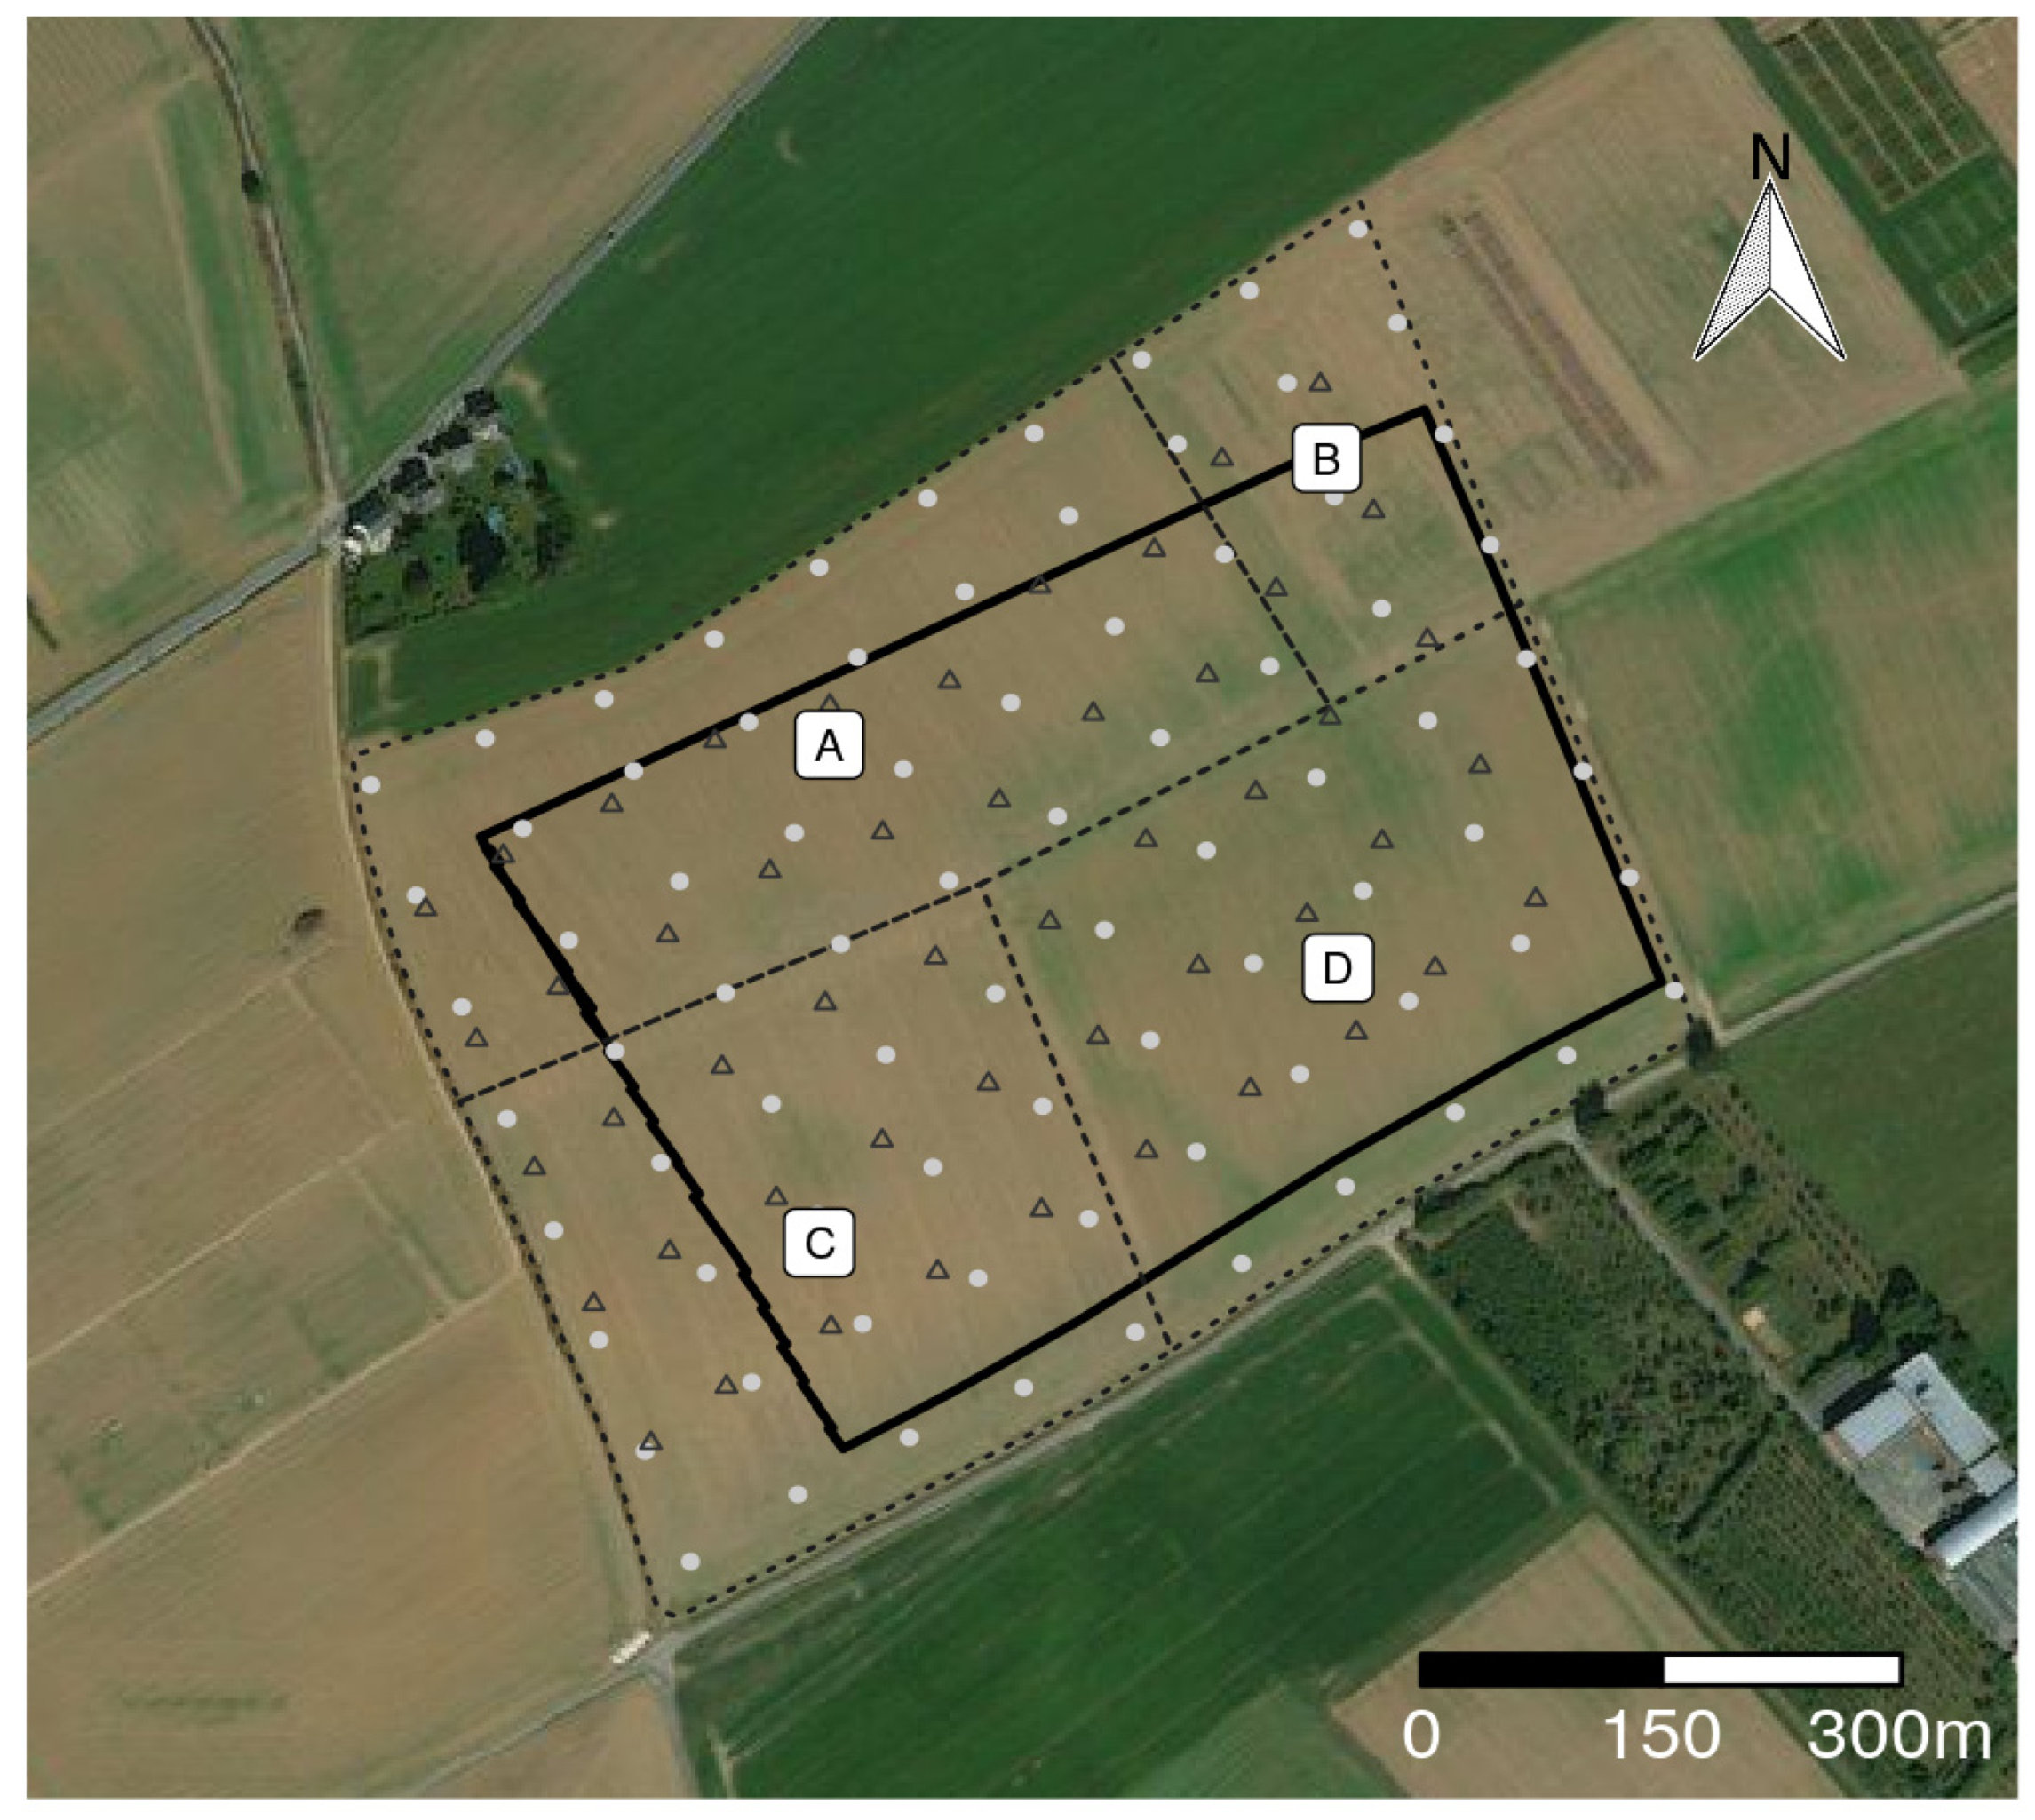 Remote Sensing | Free Full-Text | UAV Remote Sensing for Detecting  within-Field Spatial Variation of Winter Wheat Growth and Links to Soil  Properties and Historical Management Practices. A Case Study on Belgian